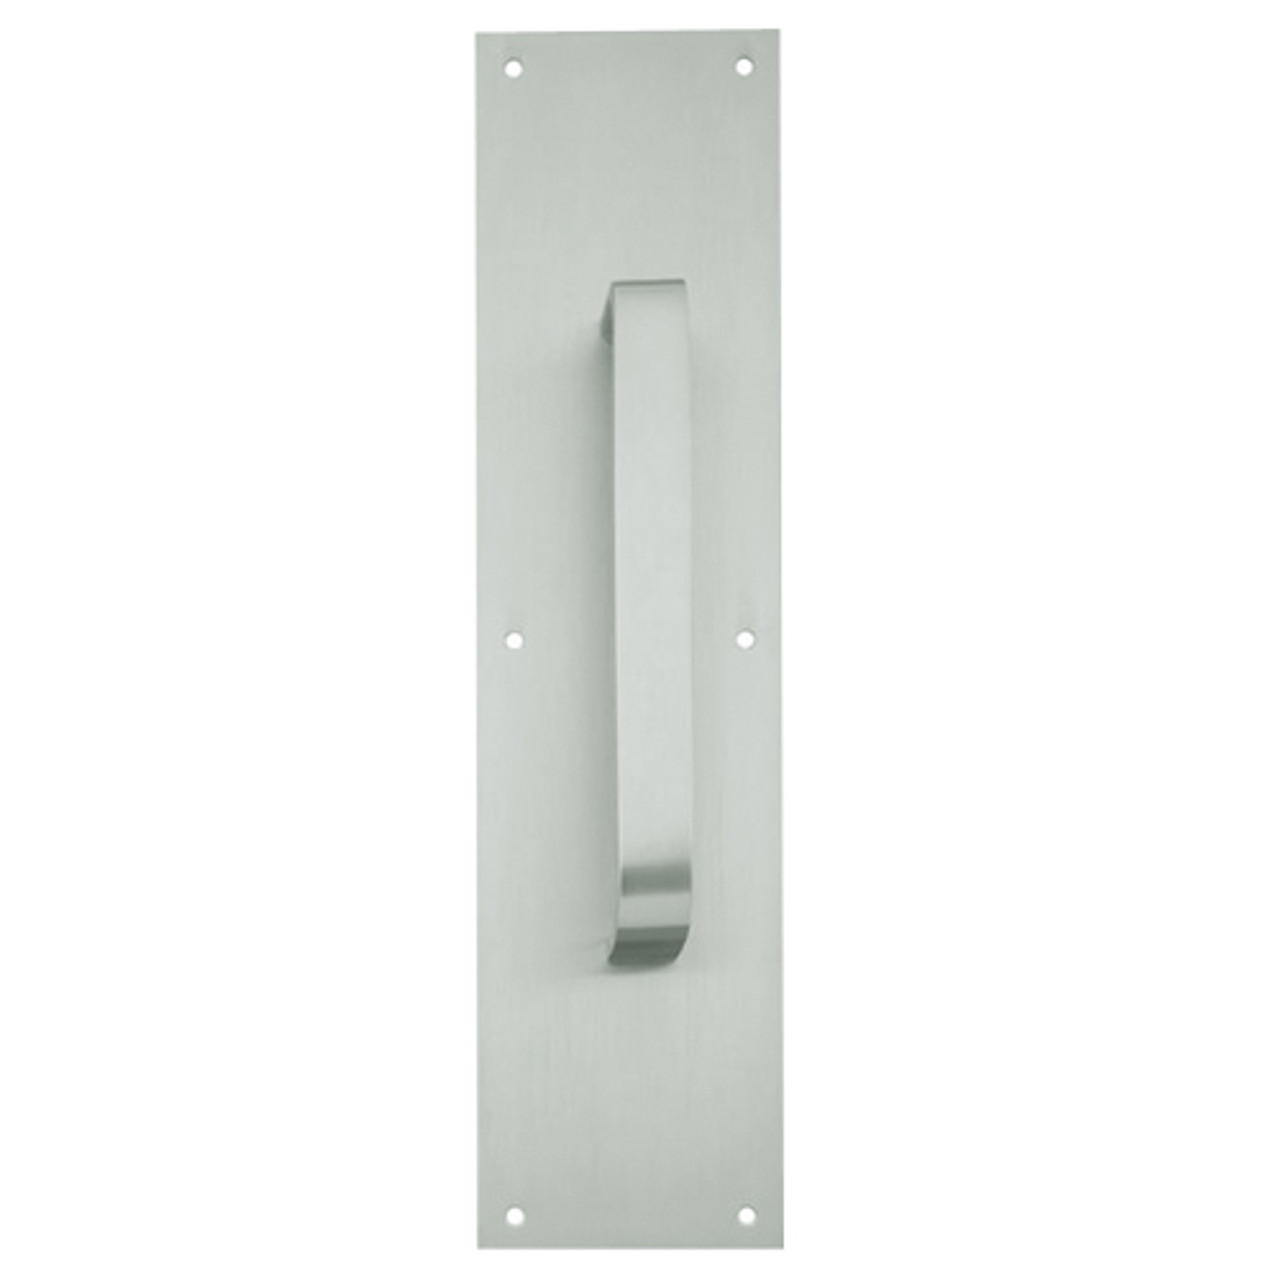 8305-10-US15-6x16 IVES Architectural Door Trim 6x16 Inch Pull Plate in Satin Nickel